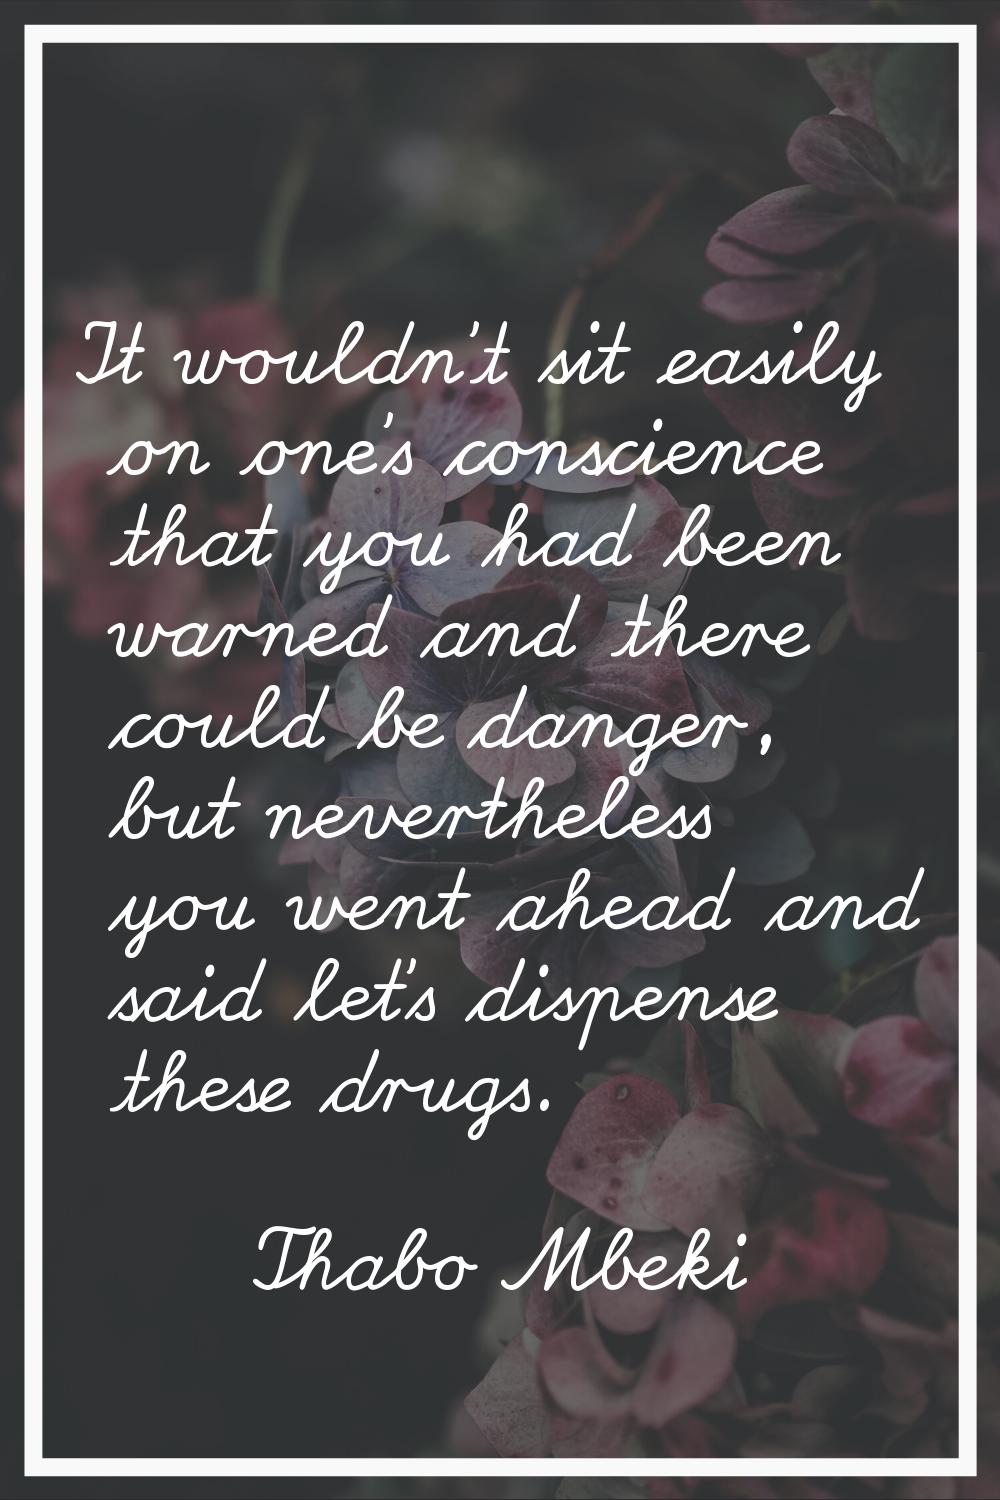 It wouldn't sit easily on one's conscience that you had been warned and there could be danger, but 